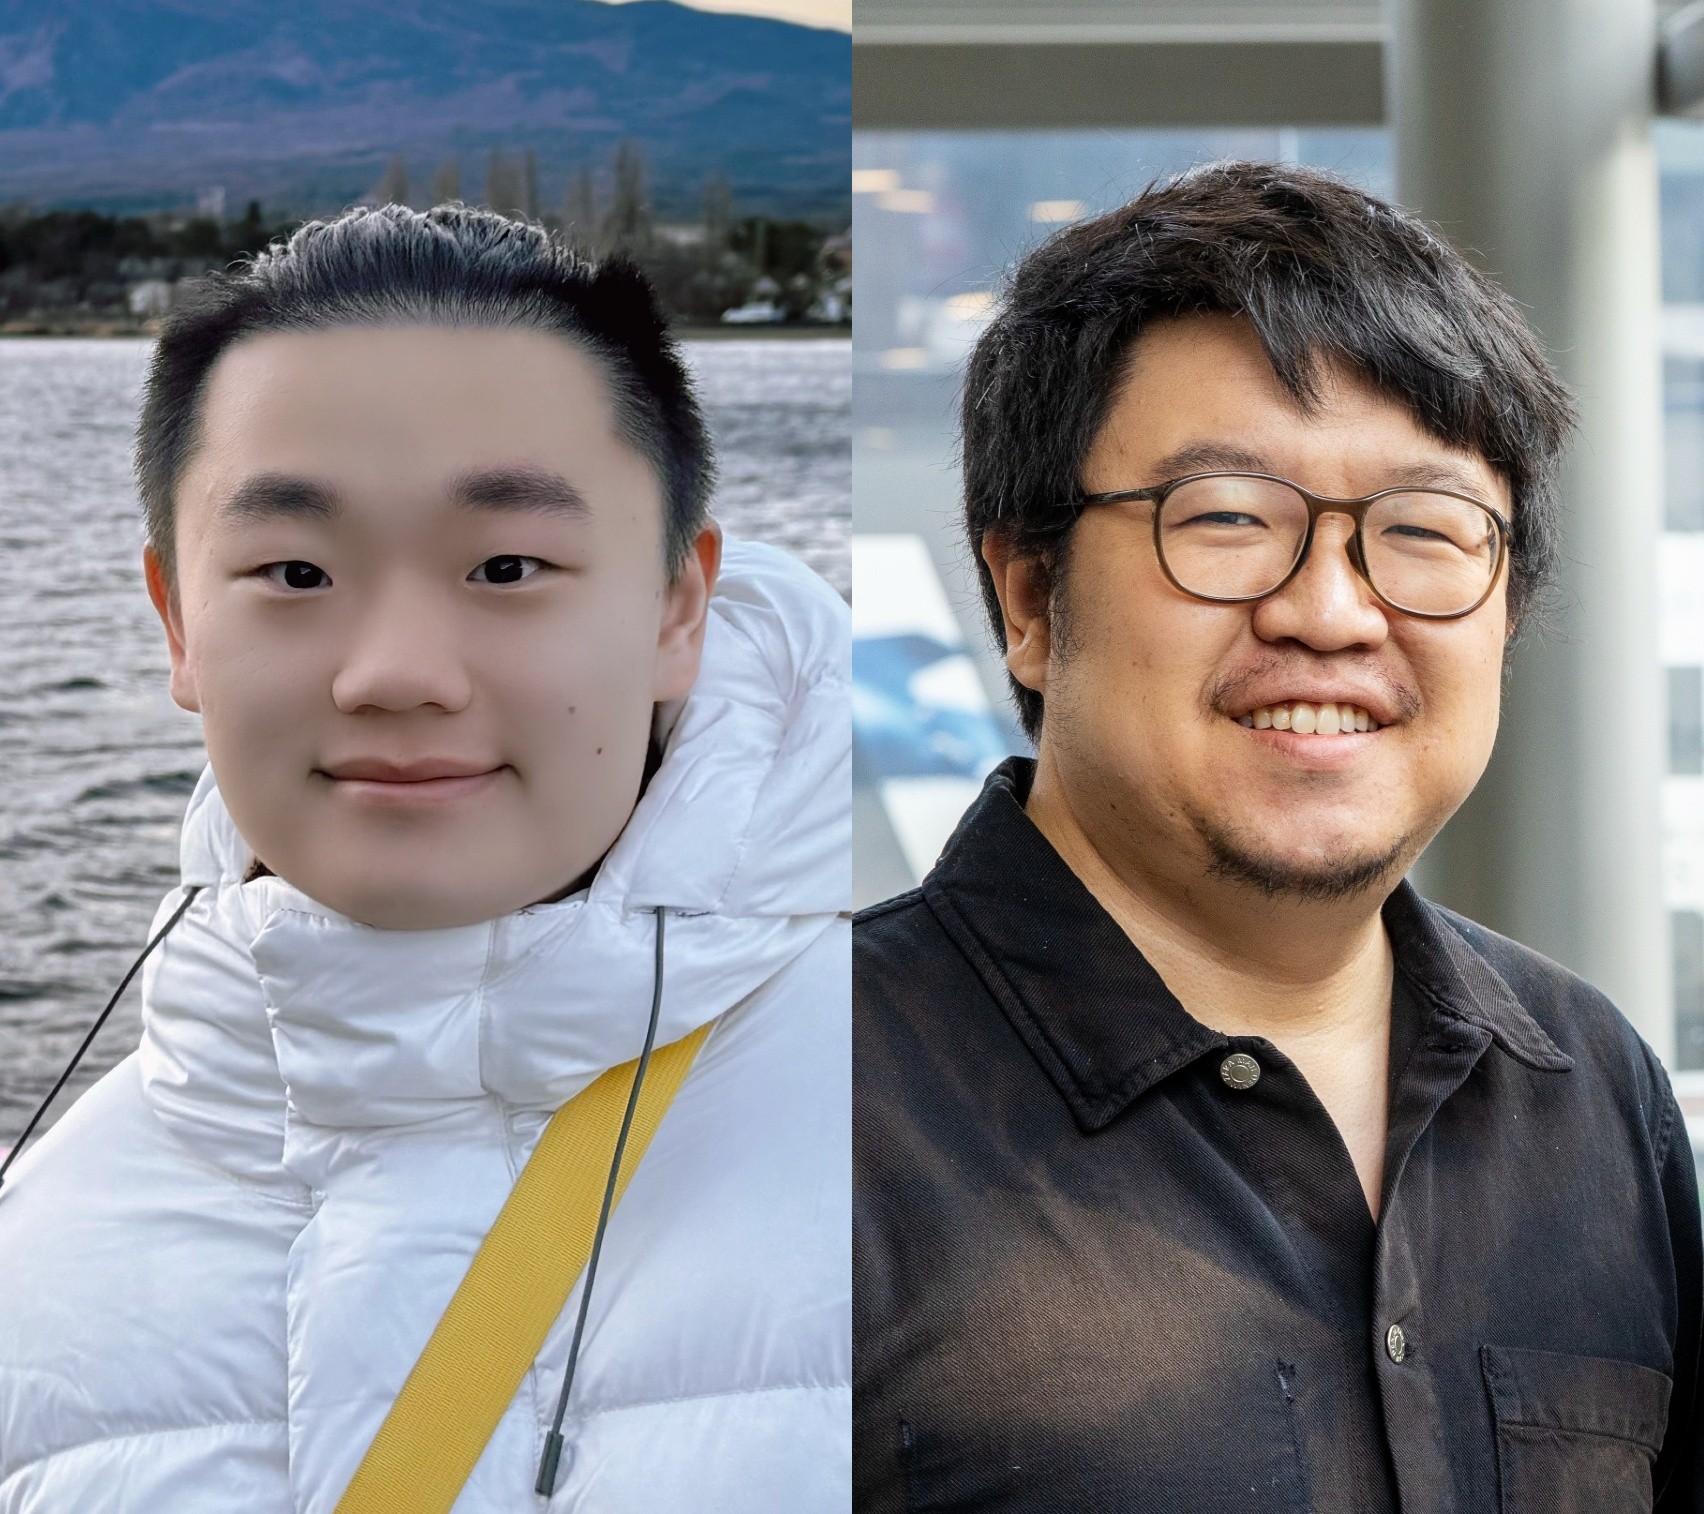 A split image featuring two people: on the left is Zeyang Ma, wearing a white jacket and standing in front of a mountainous landscape near a body of water; on the right is Peter Chen, smiling and wearing glasses with a black shirt, standing indoors with a blurred background.